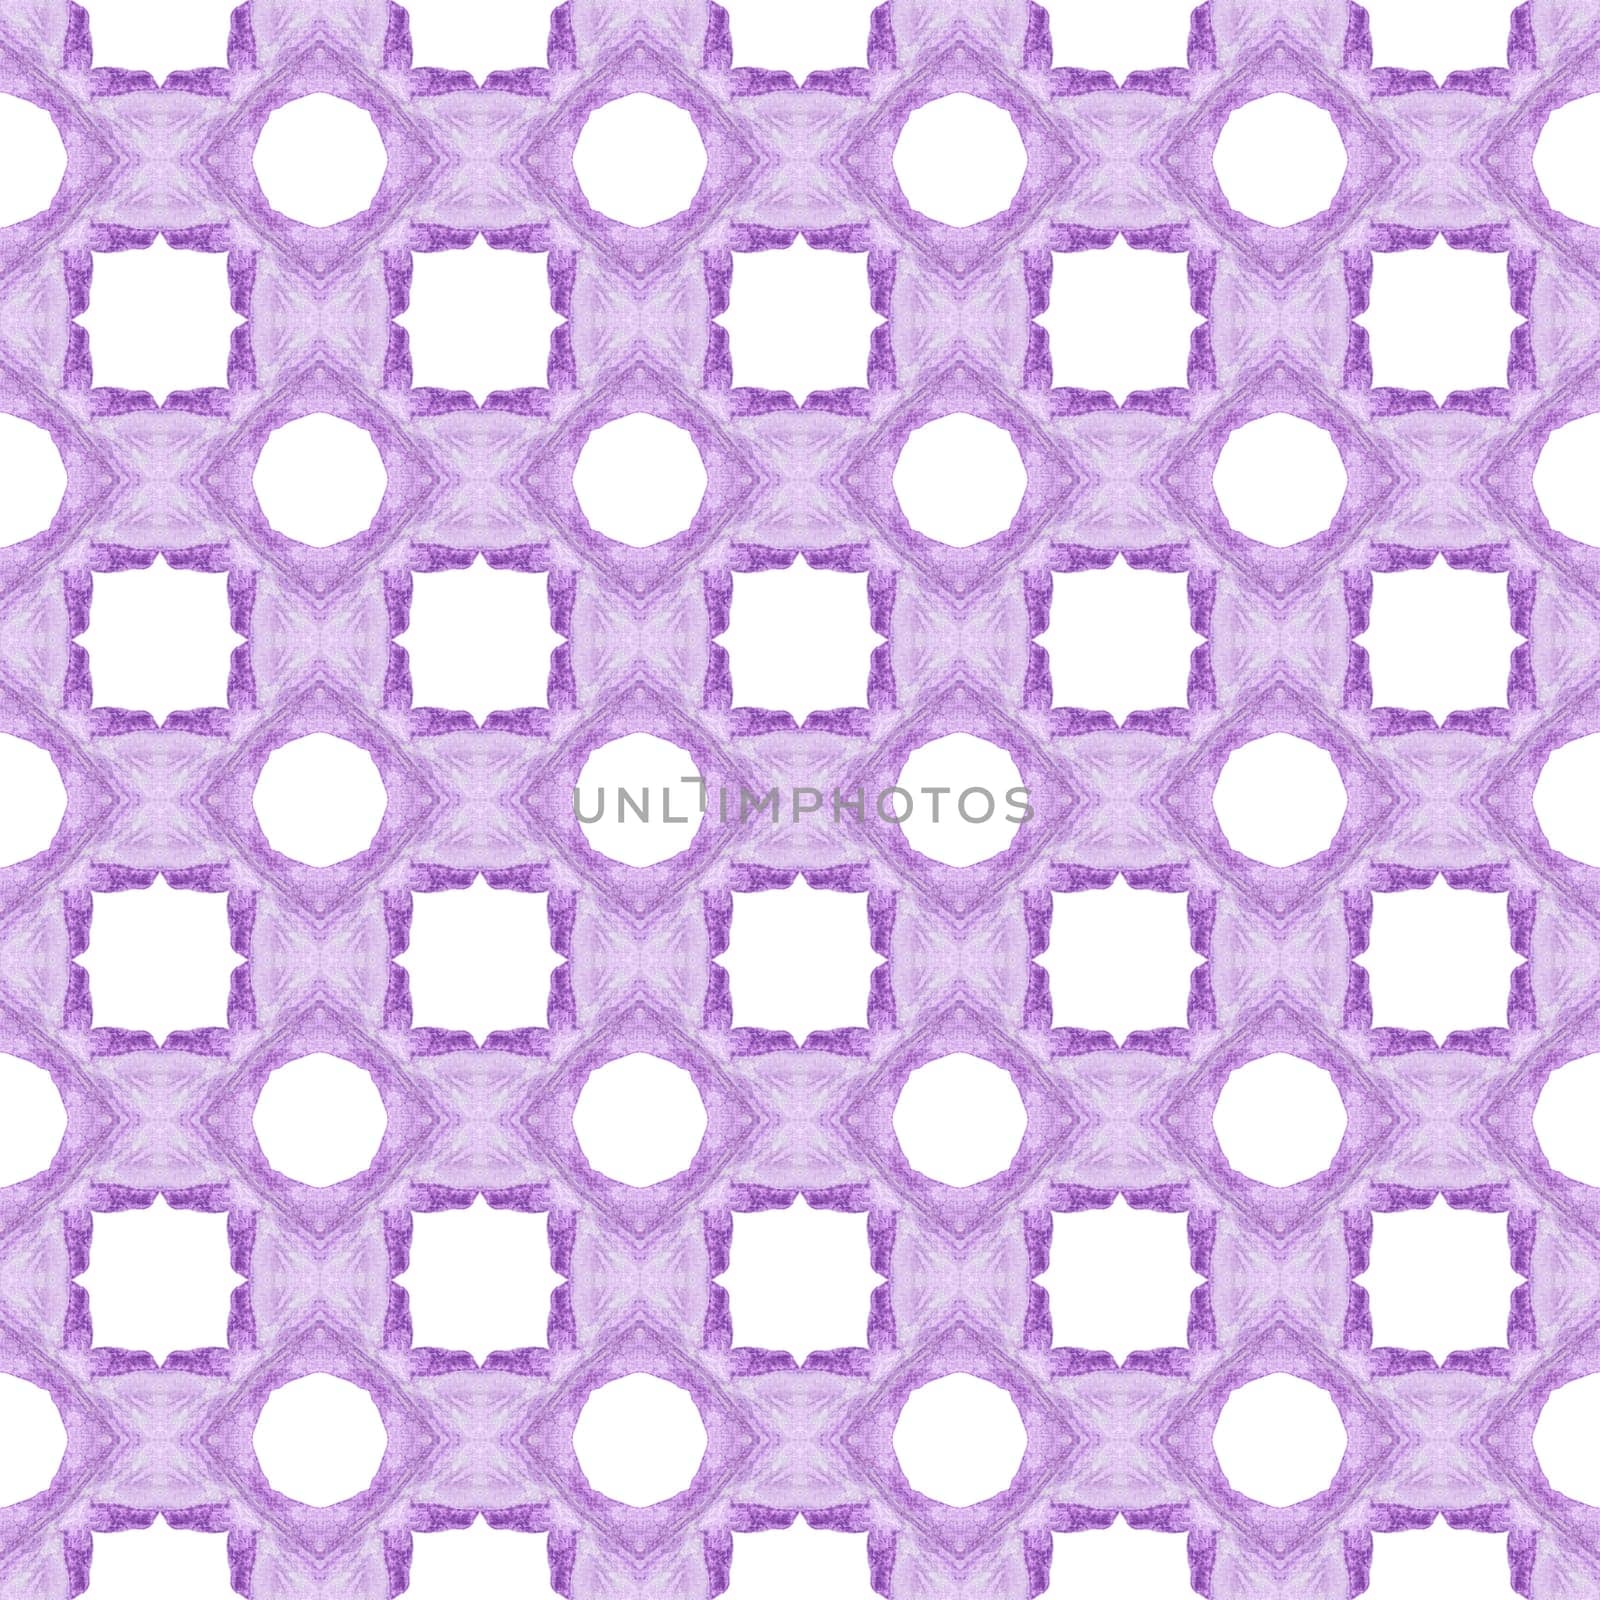 Ethnic hand painted pattern. Purple fabulous boho chic summer design. Textile ready superb print, swimwear fabric, wallpaper, wrapping. Watercolor summer ethnic border pattern.